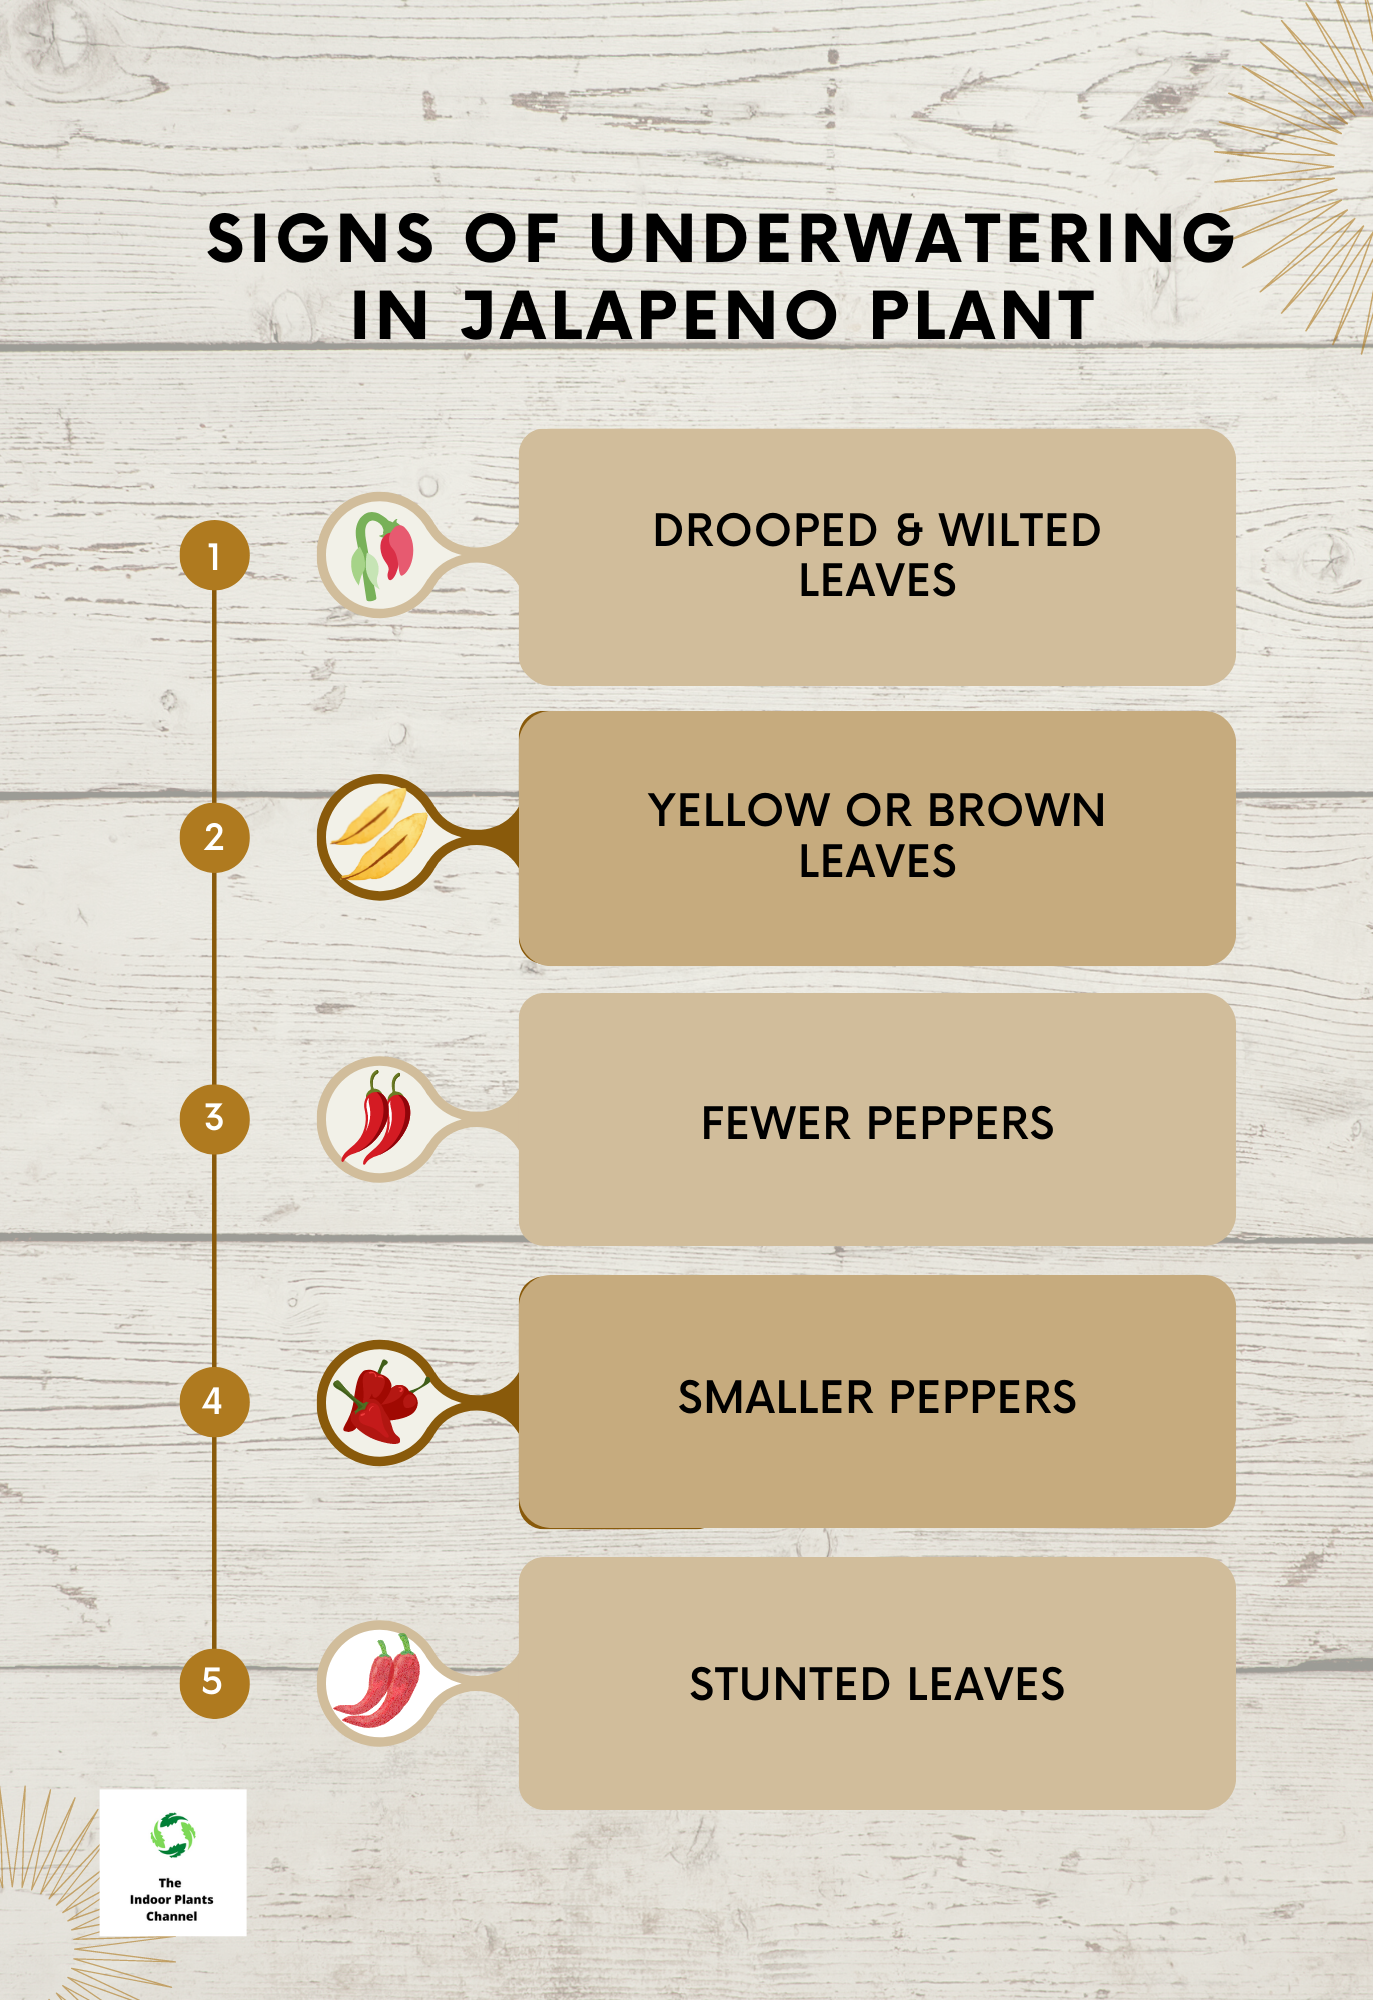 What Are The Signs Of Underwatering A Jalapeno Plant?